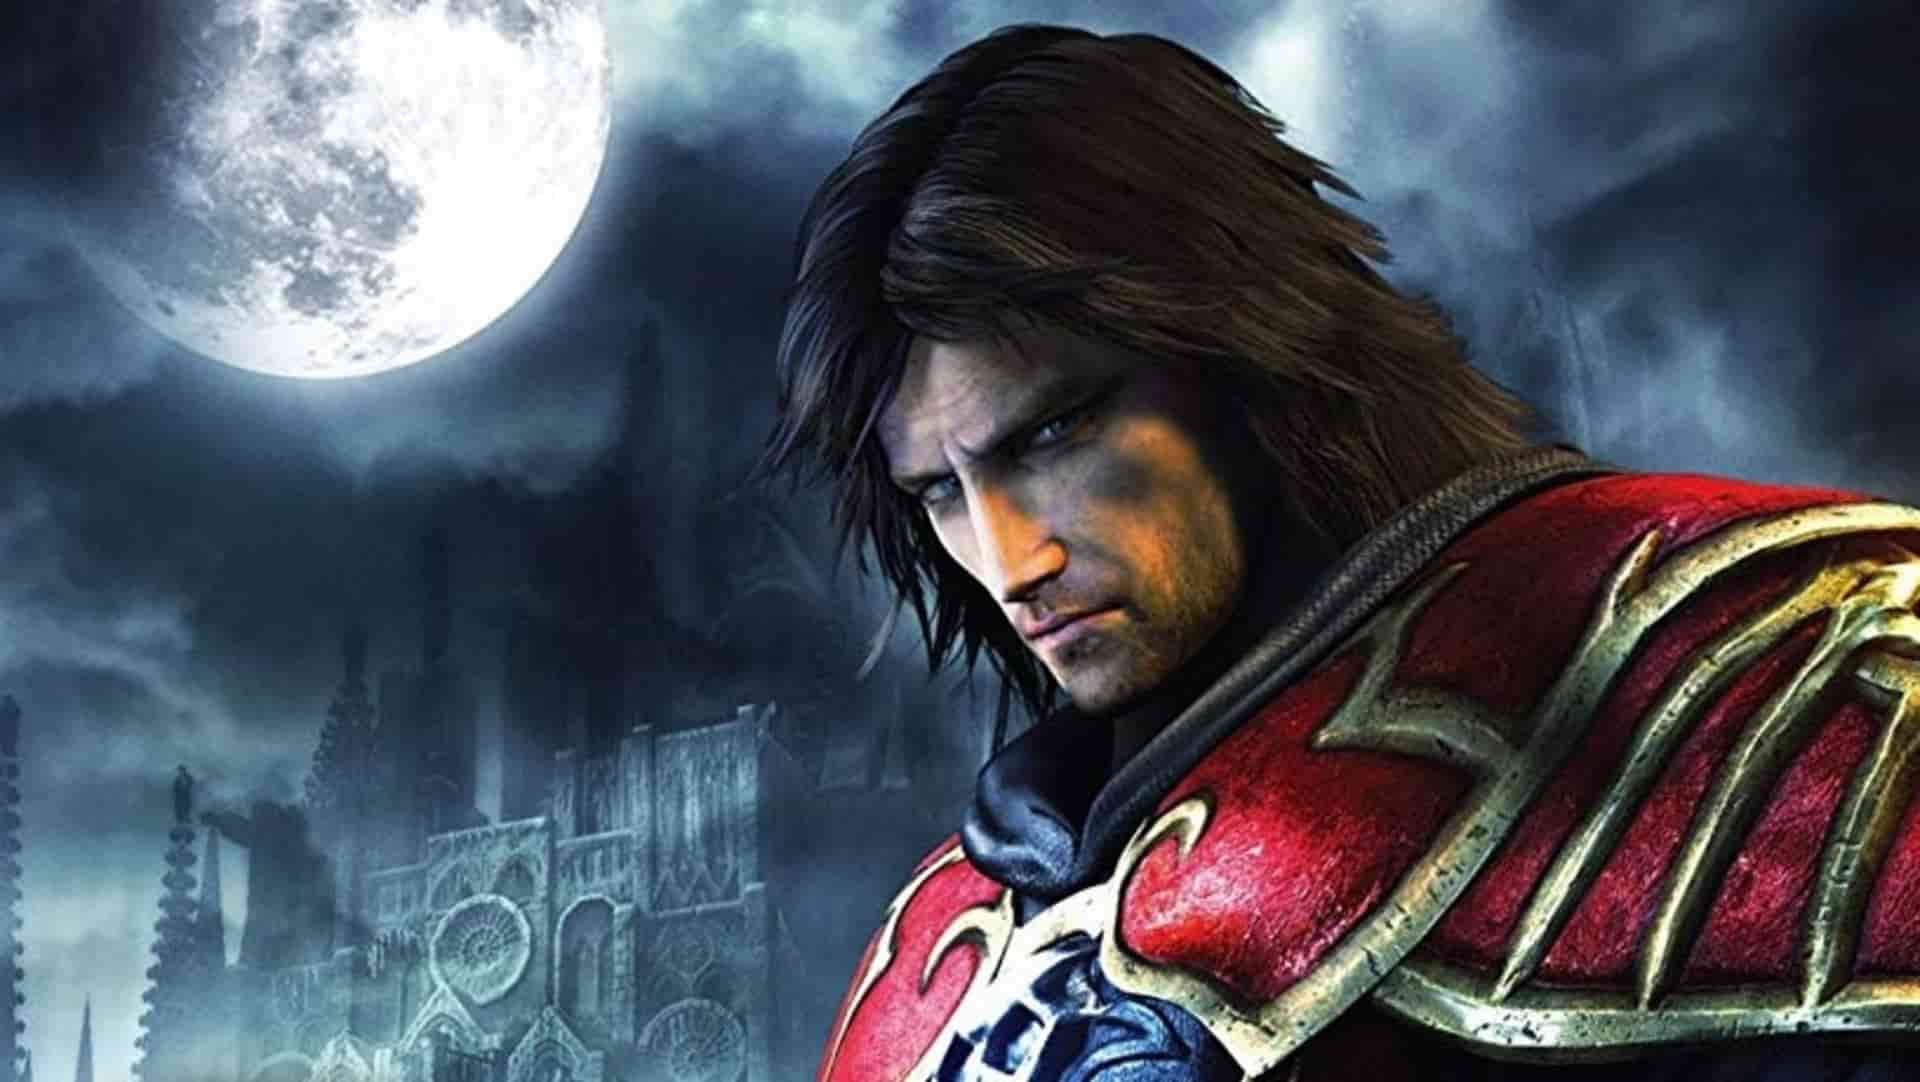 Castlevania Lords Of Shadow Dev's New Game To Be Published By 505